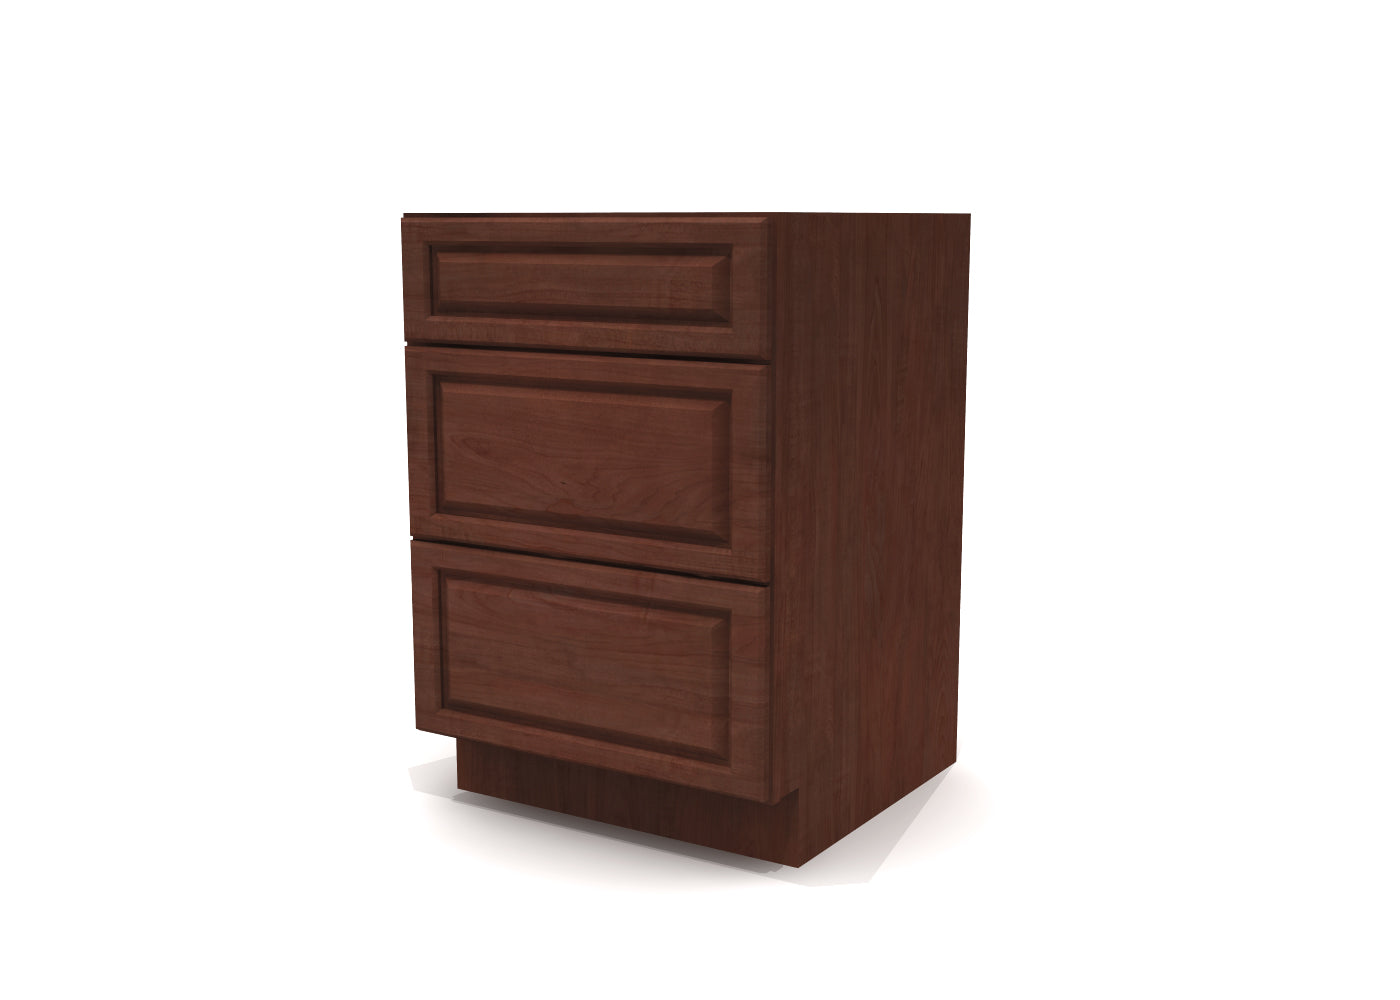 Drawer Base 24" Wide Cherry Raised Panel Cabinet